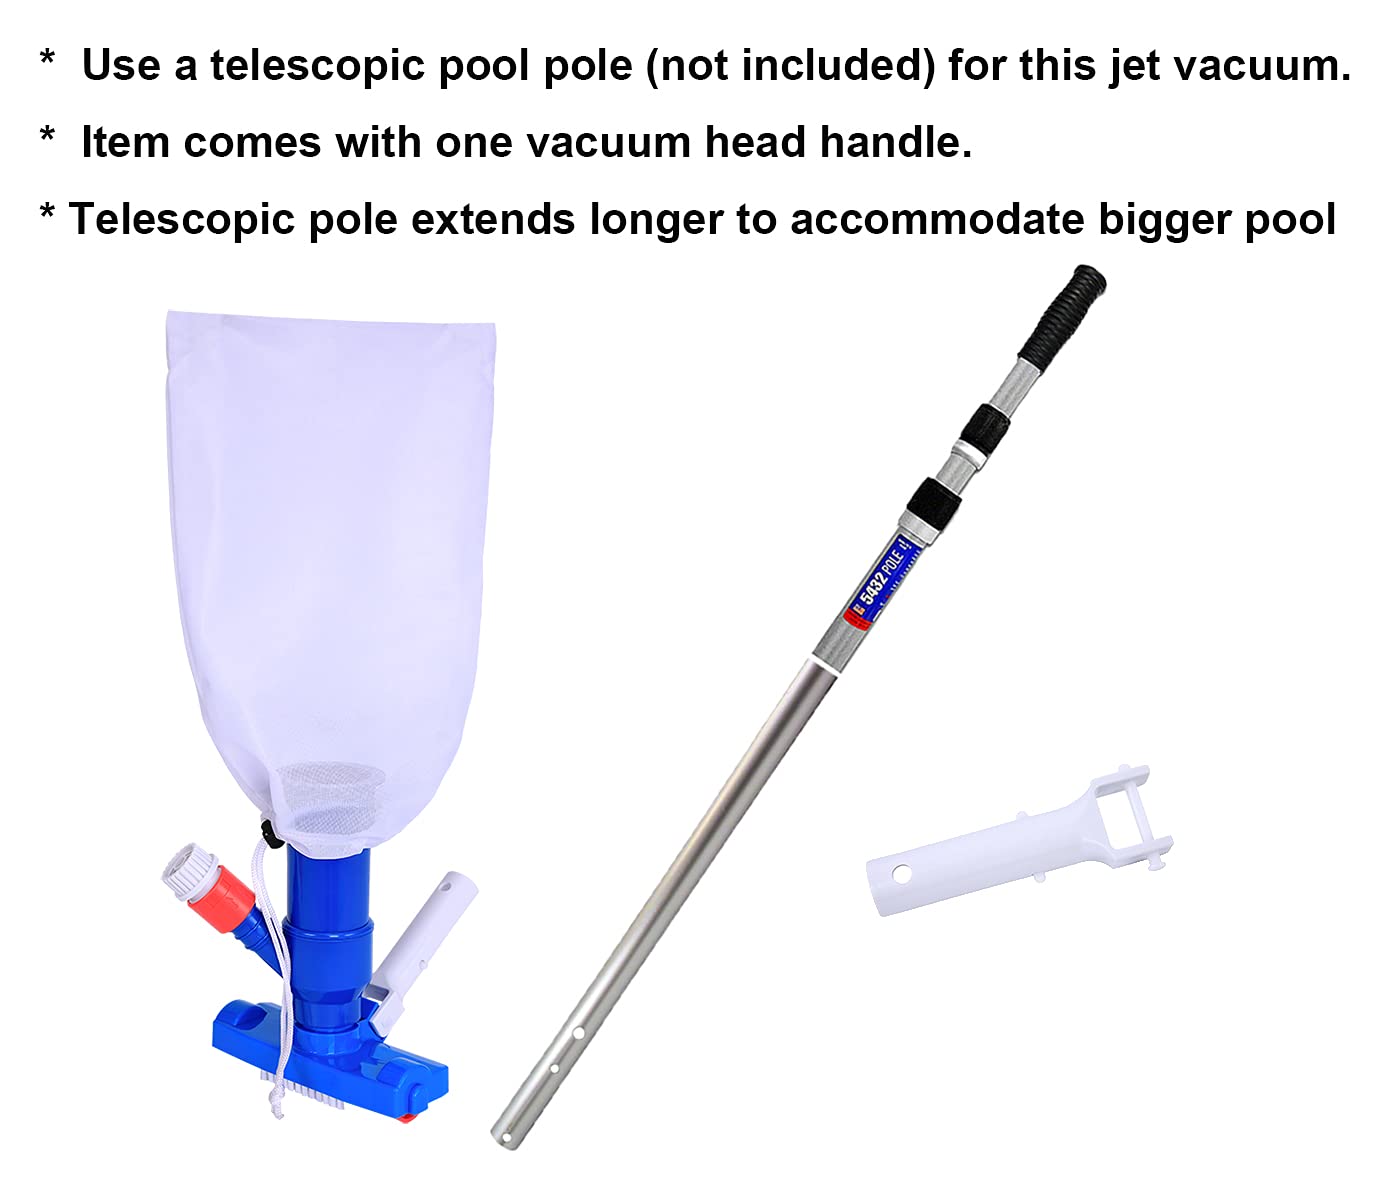 PoolSupplyTown Pool Spa Jet Vacuum Cleaner w/ Brush, Ideal for Frame Above Ground/Inflatable Pools, Spa, Hot Tub, Pond, Fountain Vacuuming, No Electric Power Needed, Use Water Pressure From Garden Hose to Vacuum (Use with A Telescopic Pool Pole, Not In...